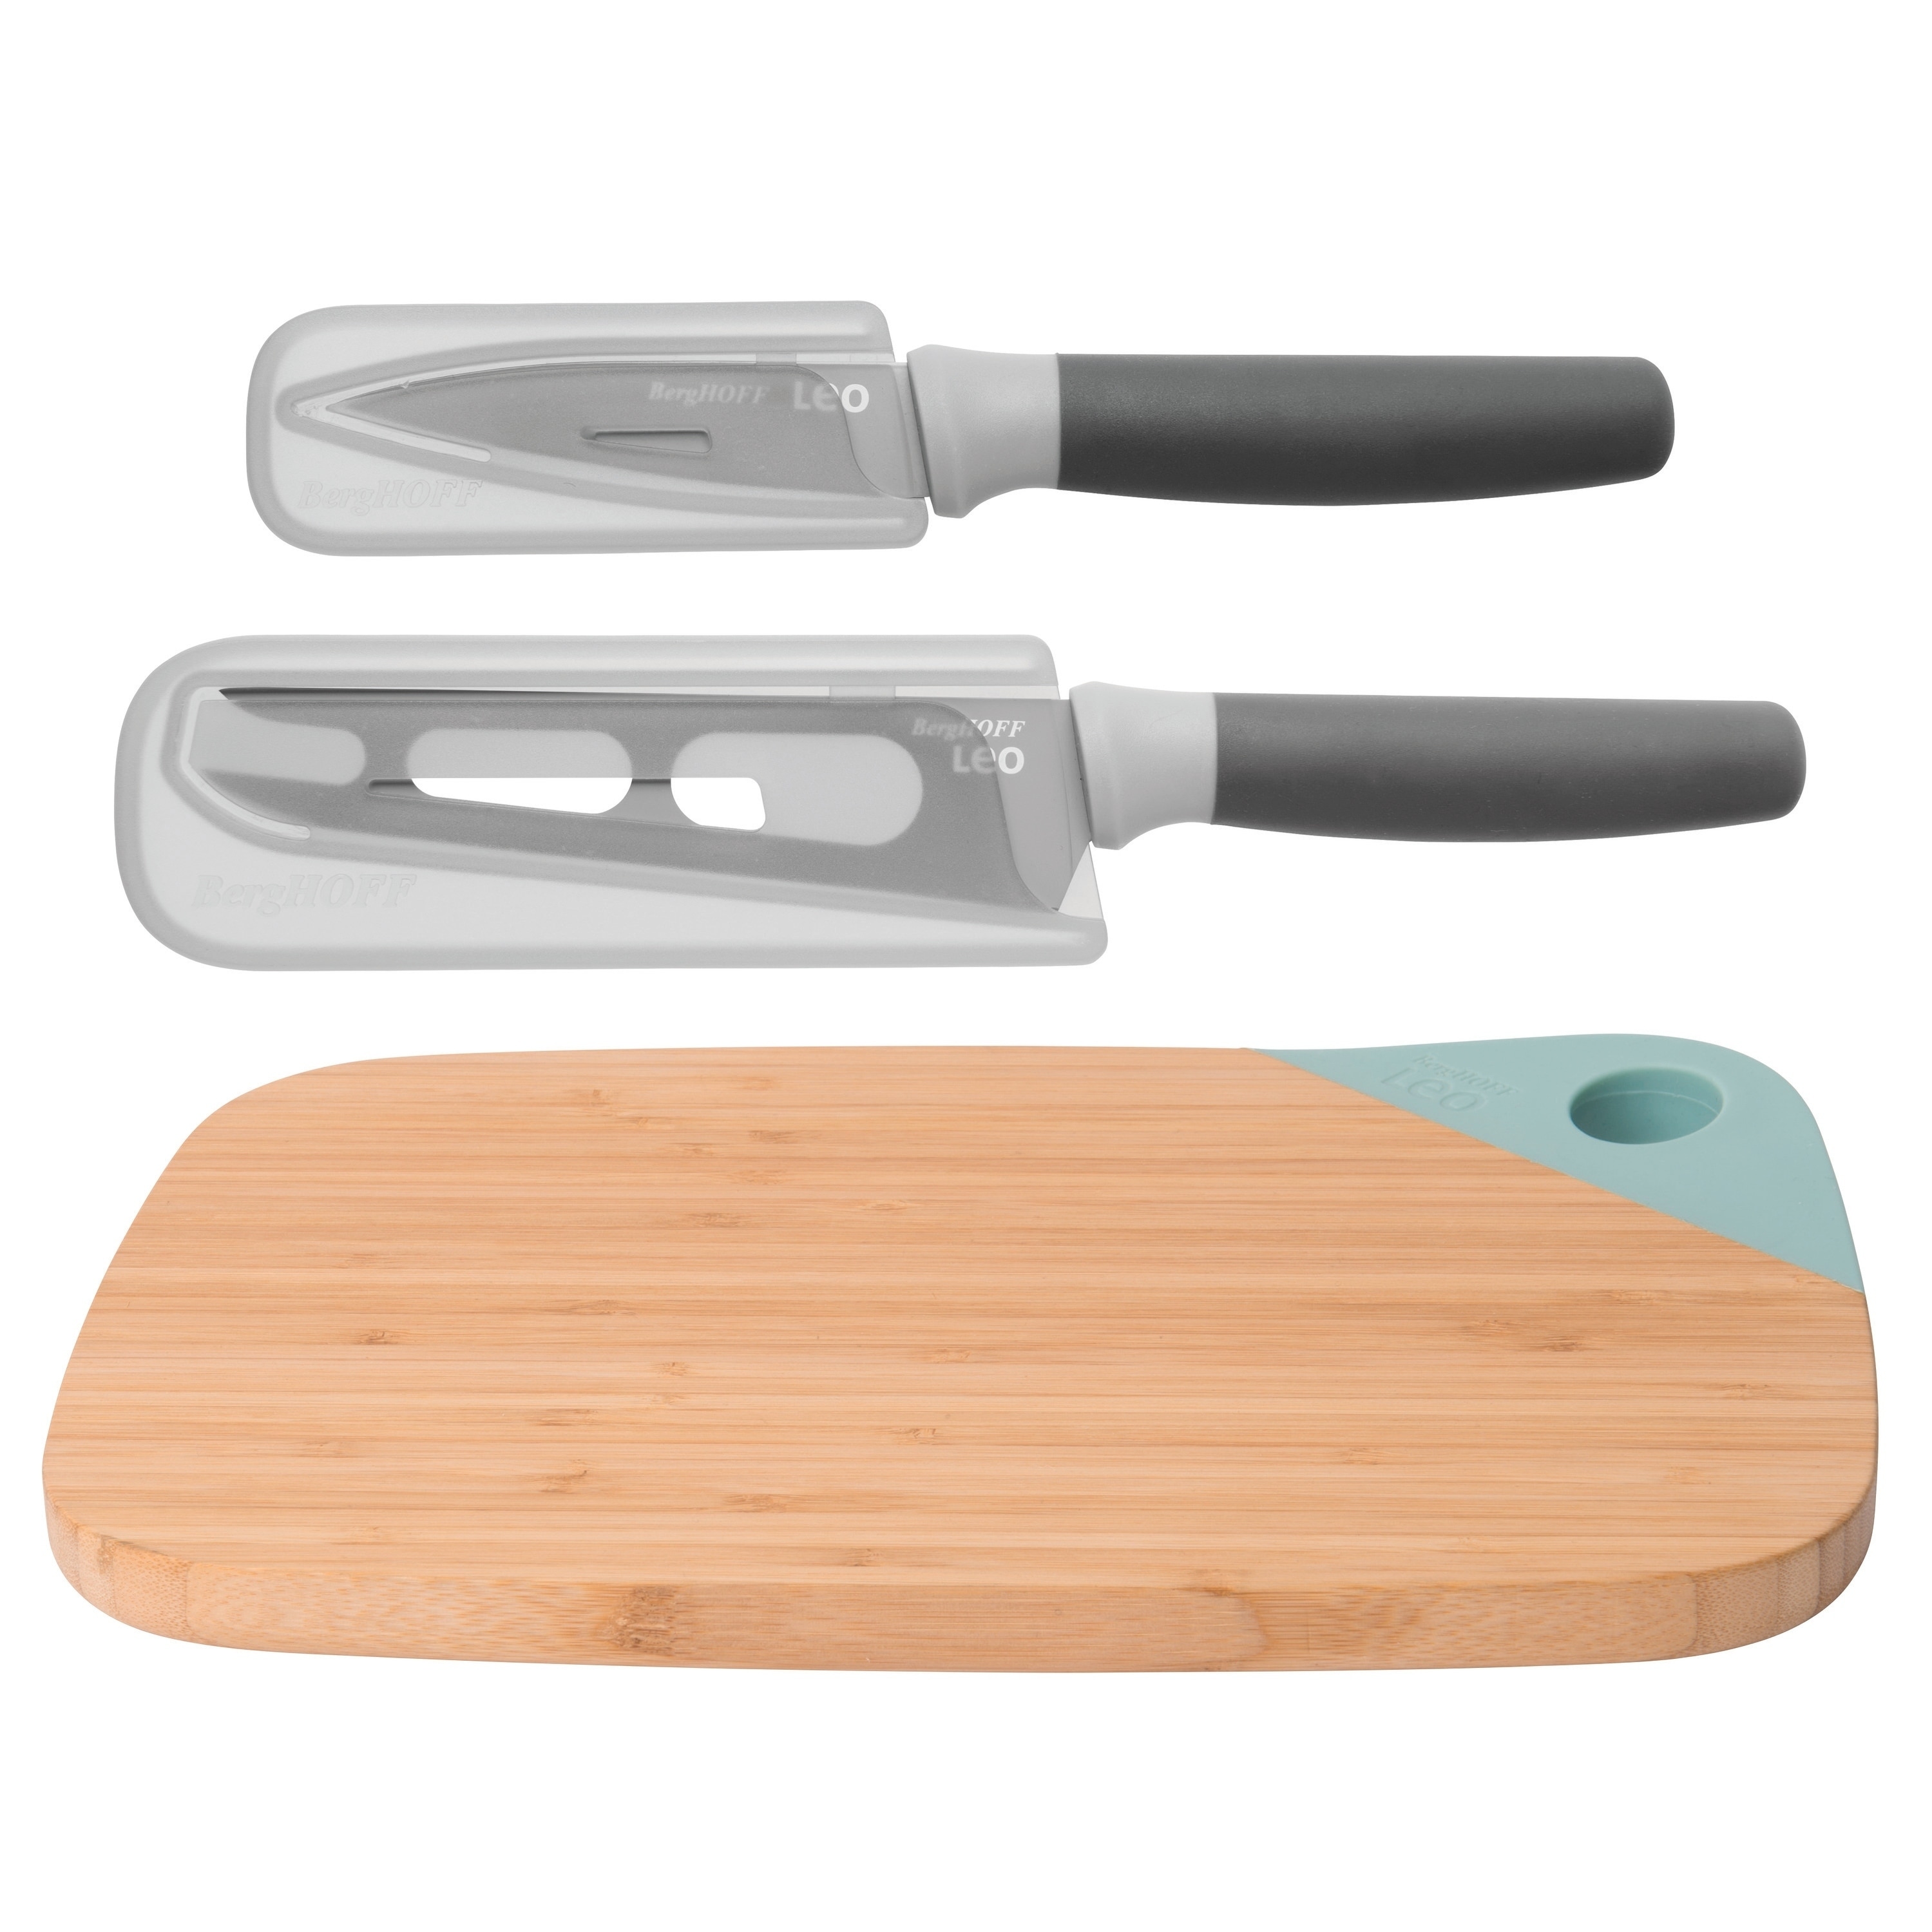 https://ak1.ostkcdn.com/images/products/30502592/Leo-3-Piece-Knife-and-Cutting-Board-Set-Gray-and-Green-1b2e14ac-6d1c-4808-bde5-e62f216685e7.jpg